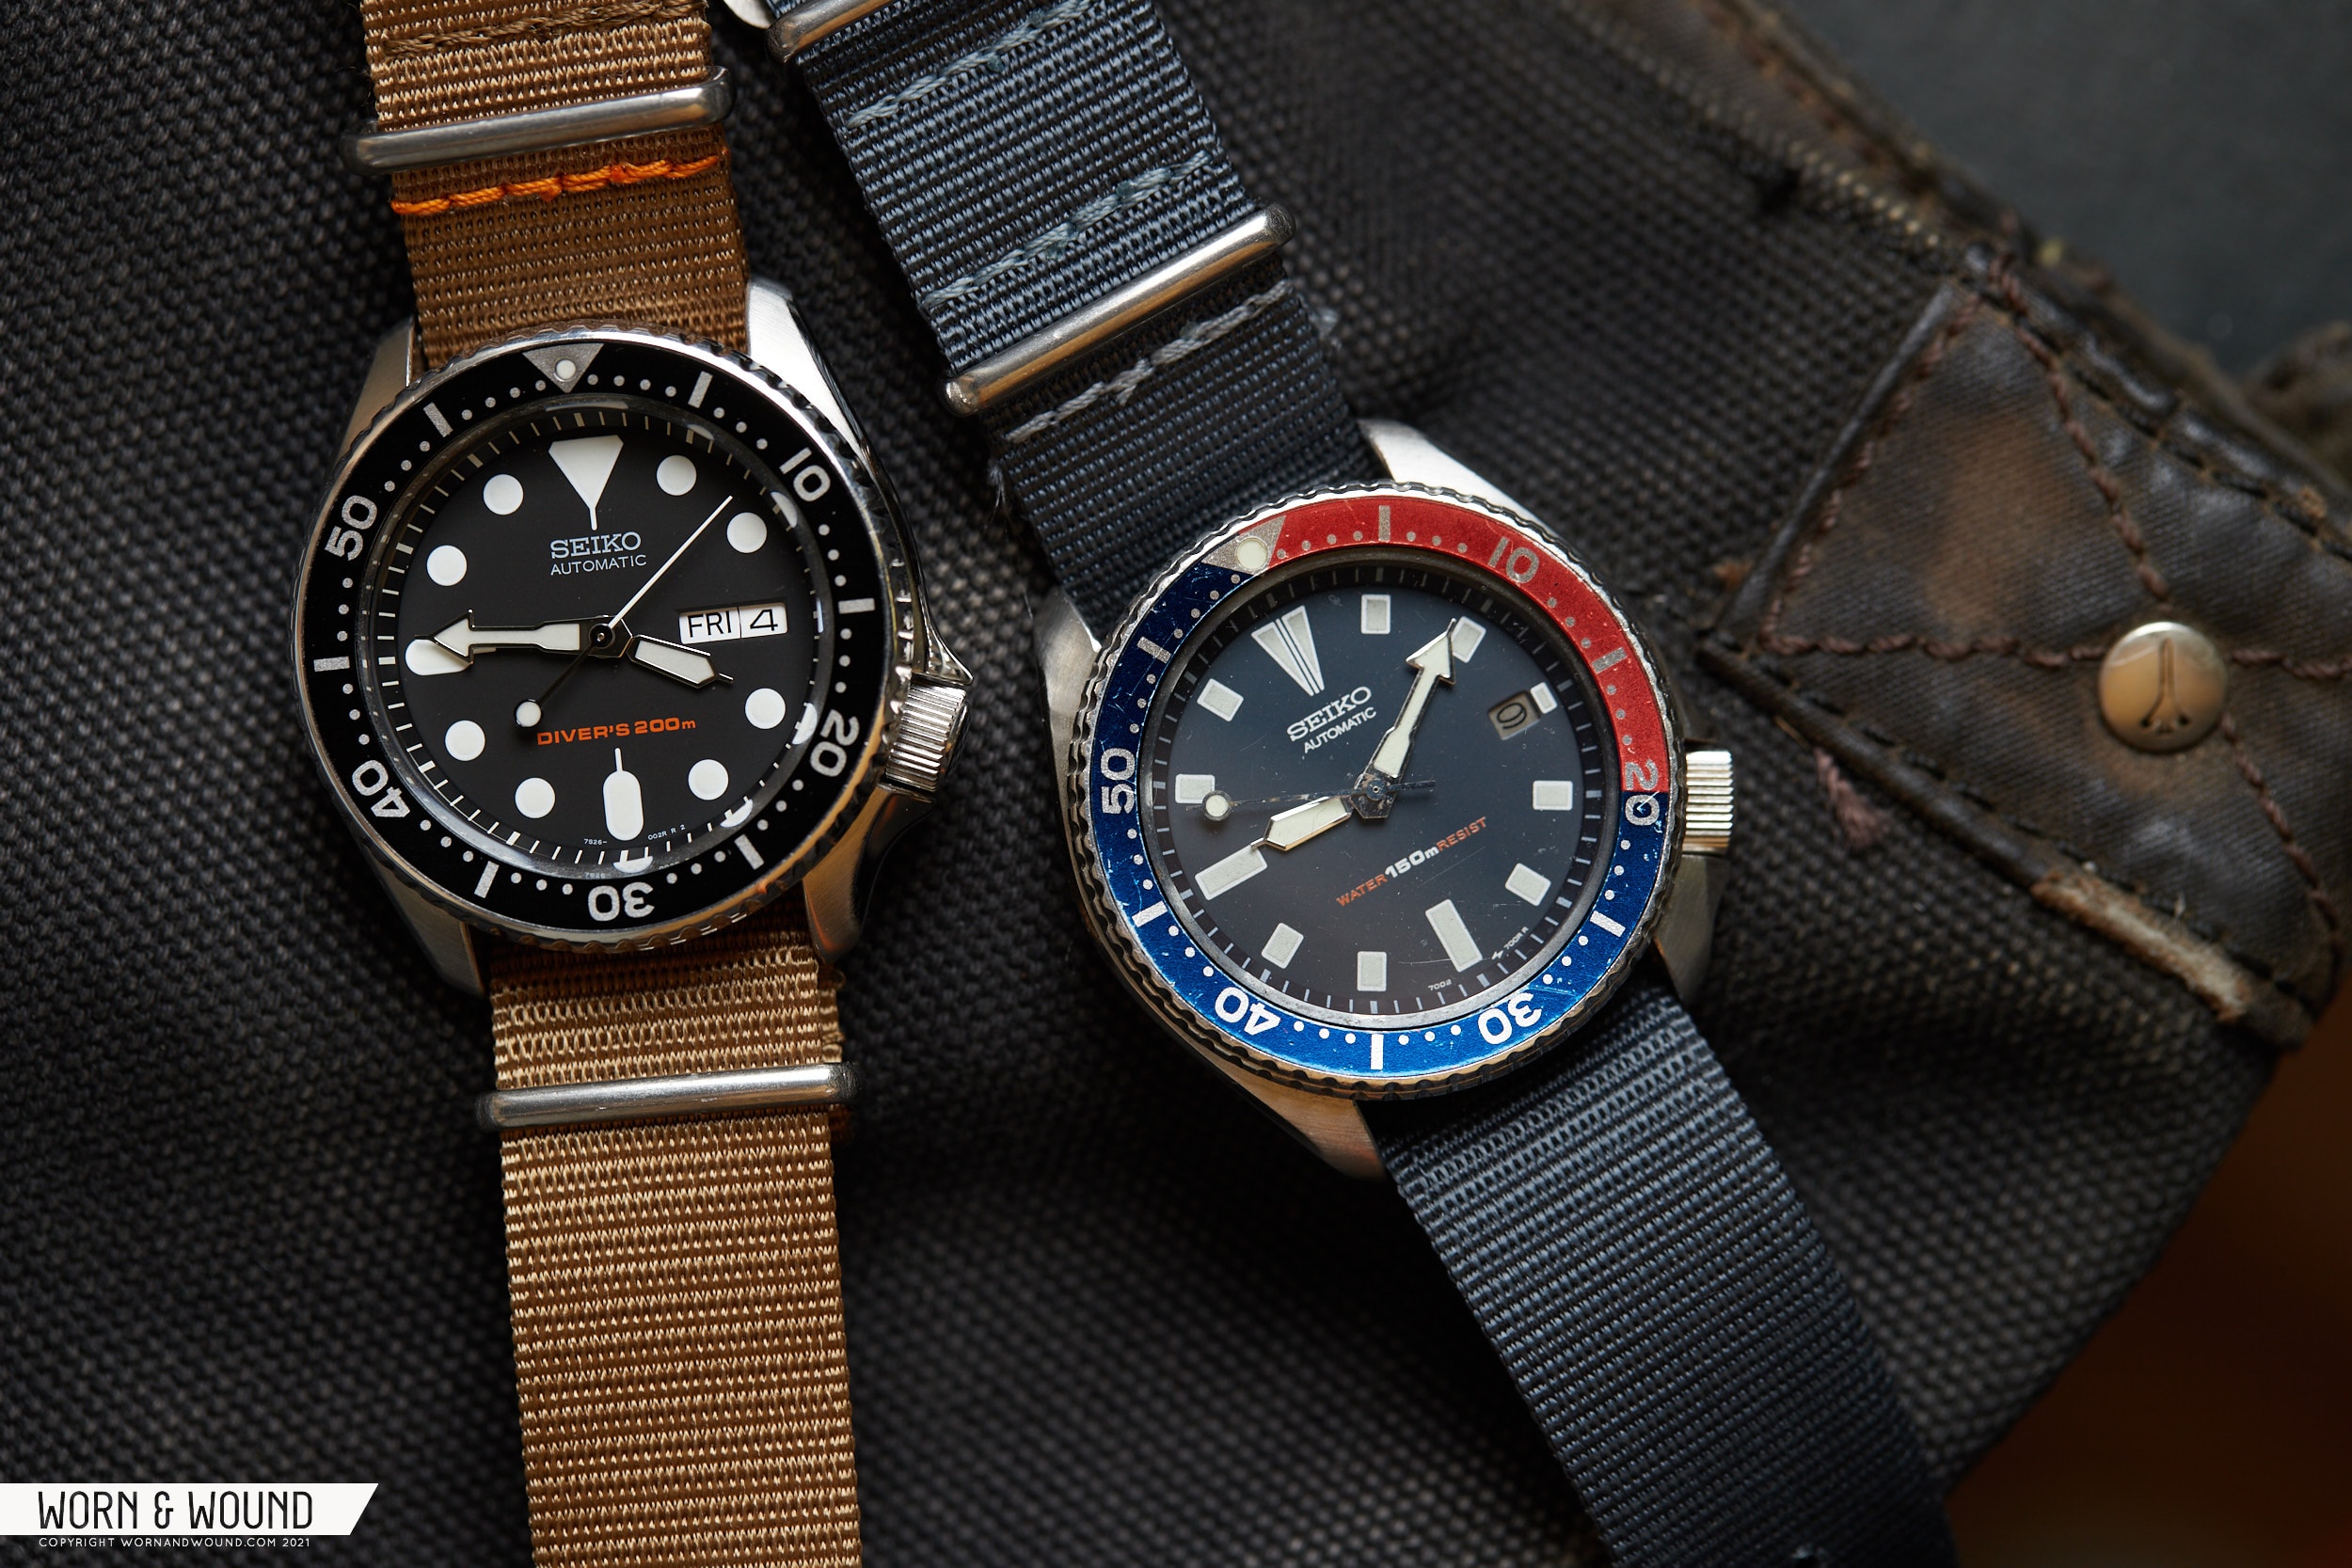 10 Years Later: The Seiko SKX007 As Seen By The W&W Editors